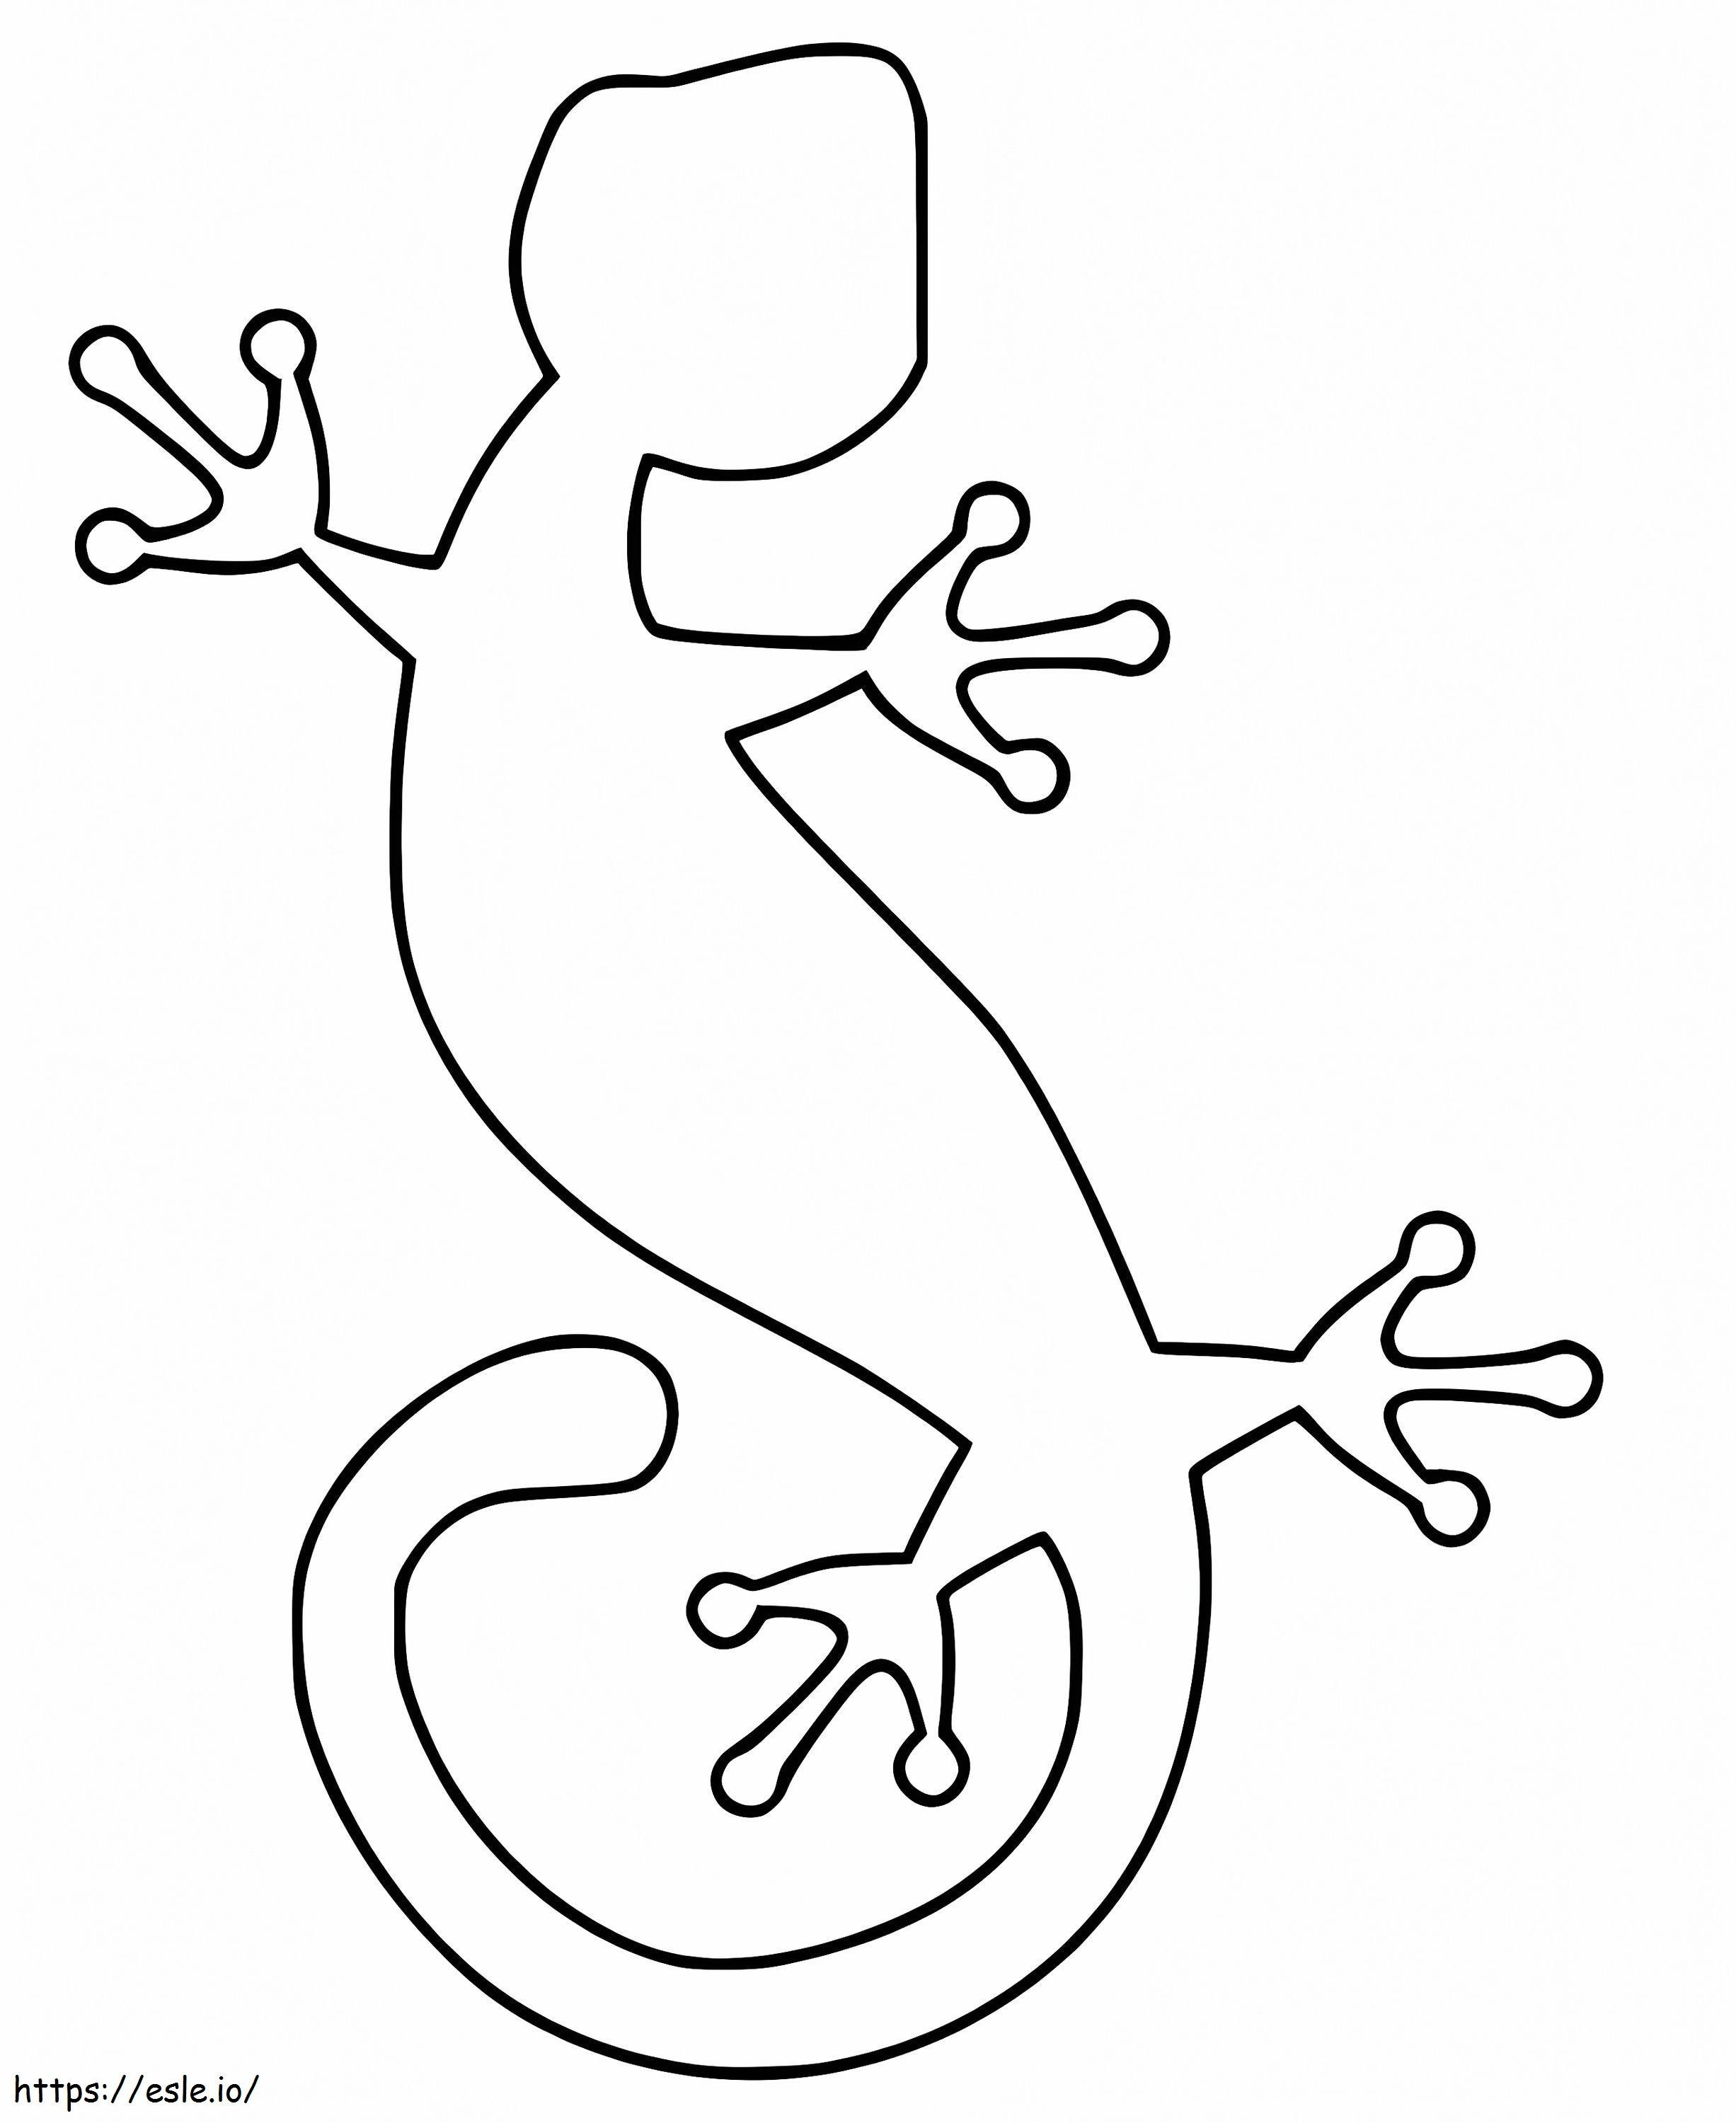 Gecko Outline coloring page